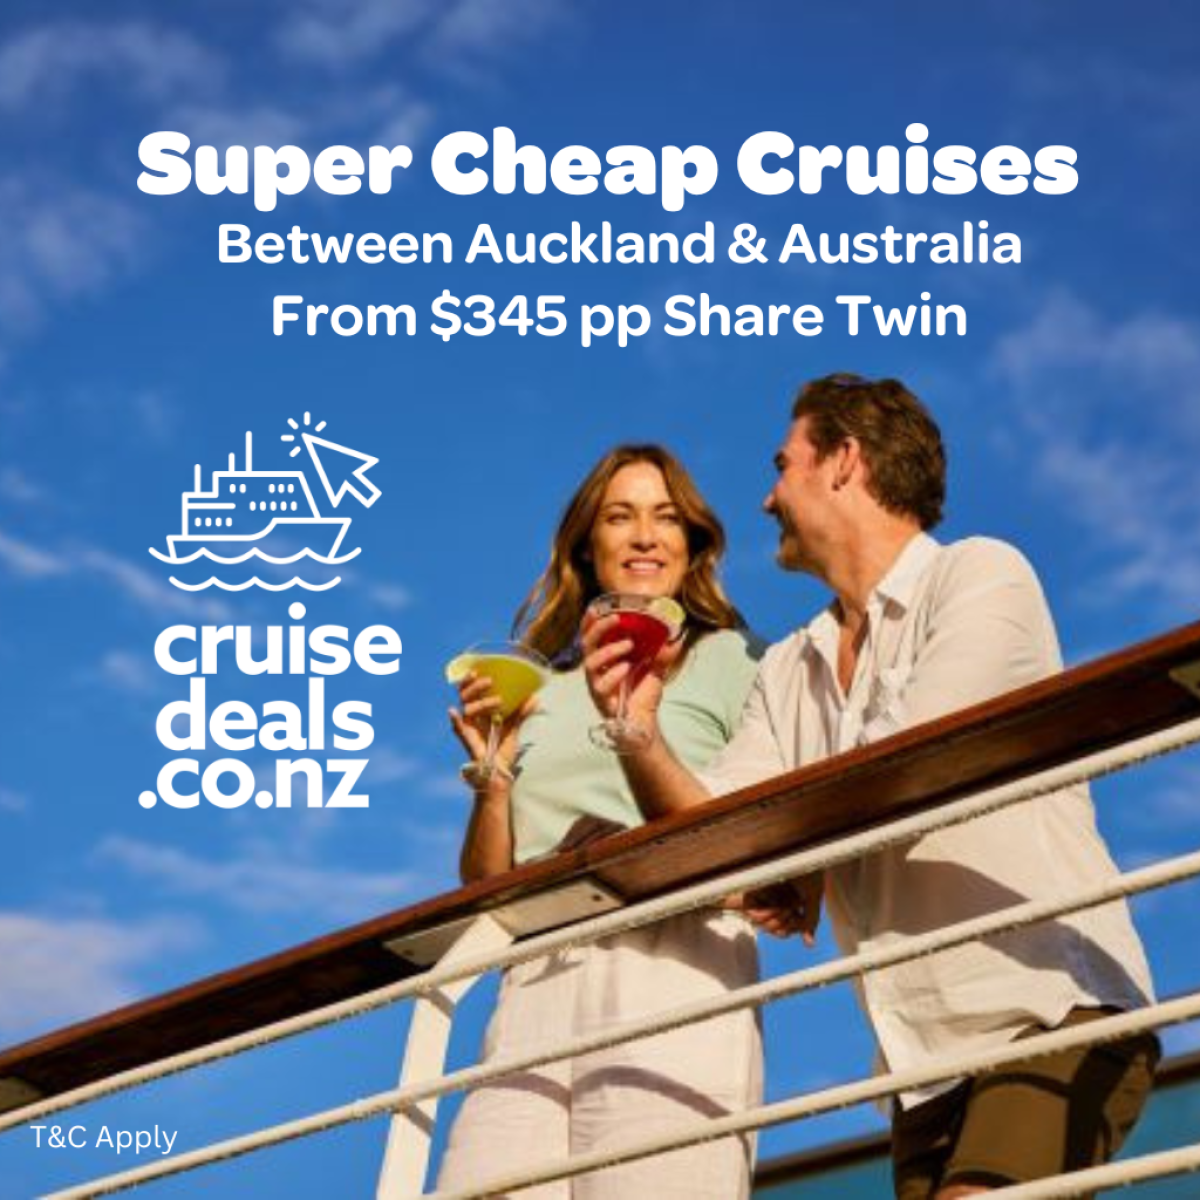 Cheap cruises to Australia from $345 per person one way